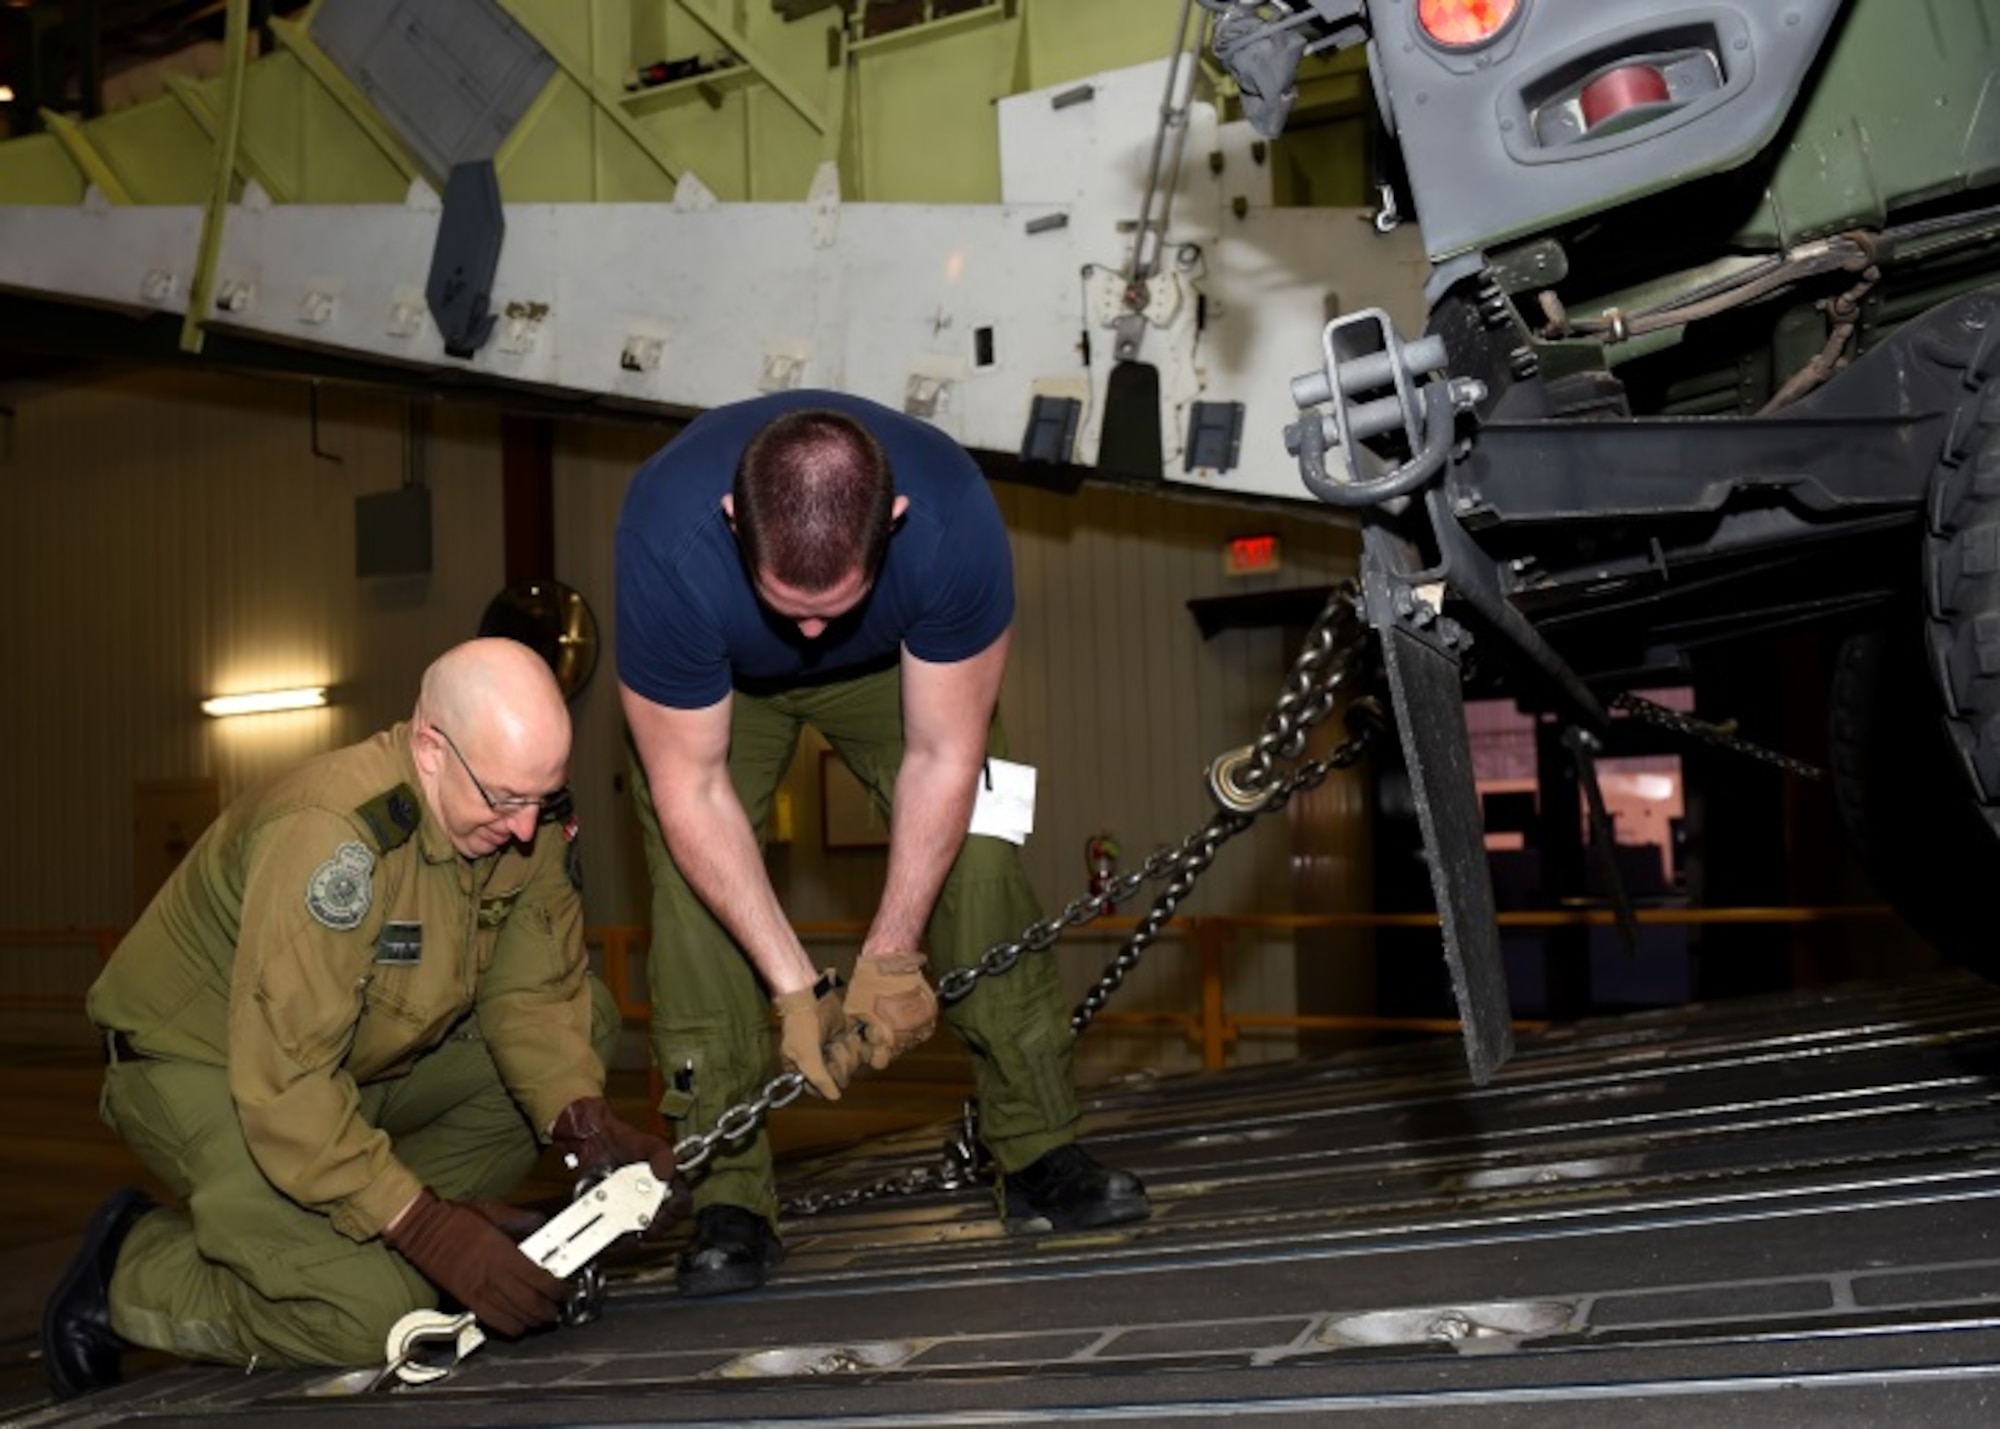 Royal Canadian air force Sgt. David Burrill and Royal Canadian air force Master Corporal Derek Bristol, Globemaster III cargo aircraft loadmaster trainees, secure a vehicle inside a C-17 Globemaster III cargo simulator at Altus Air Force Base, Okla., Dec. 16, 2015. Training international students helps improve joint nation missions with uniformed knowledge and operations. (U.S. Air Force photo by Airman 1st Class Kirby Turbak/Released)